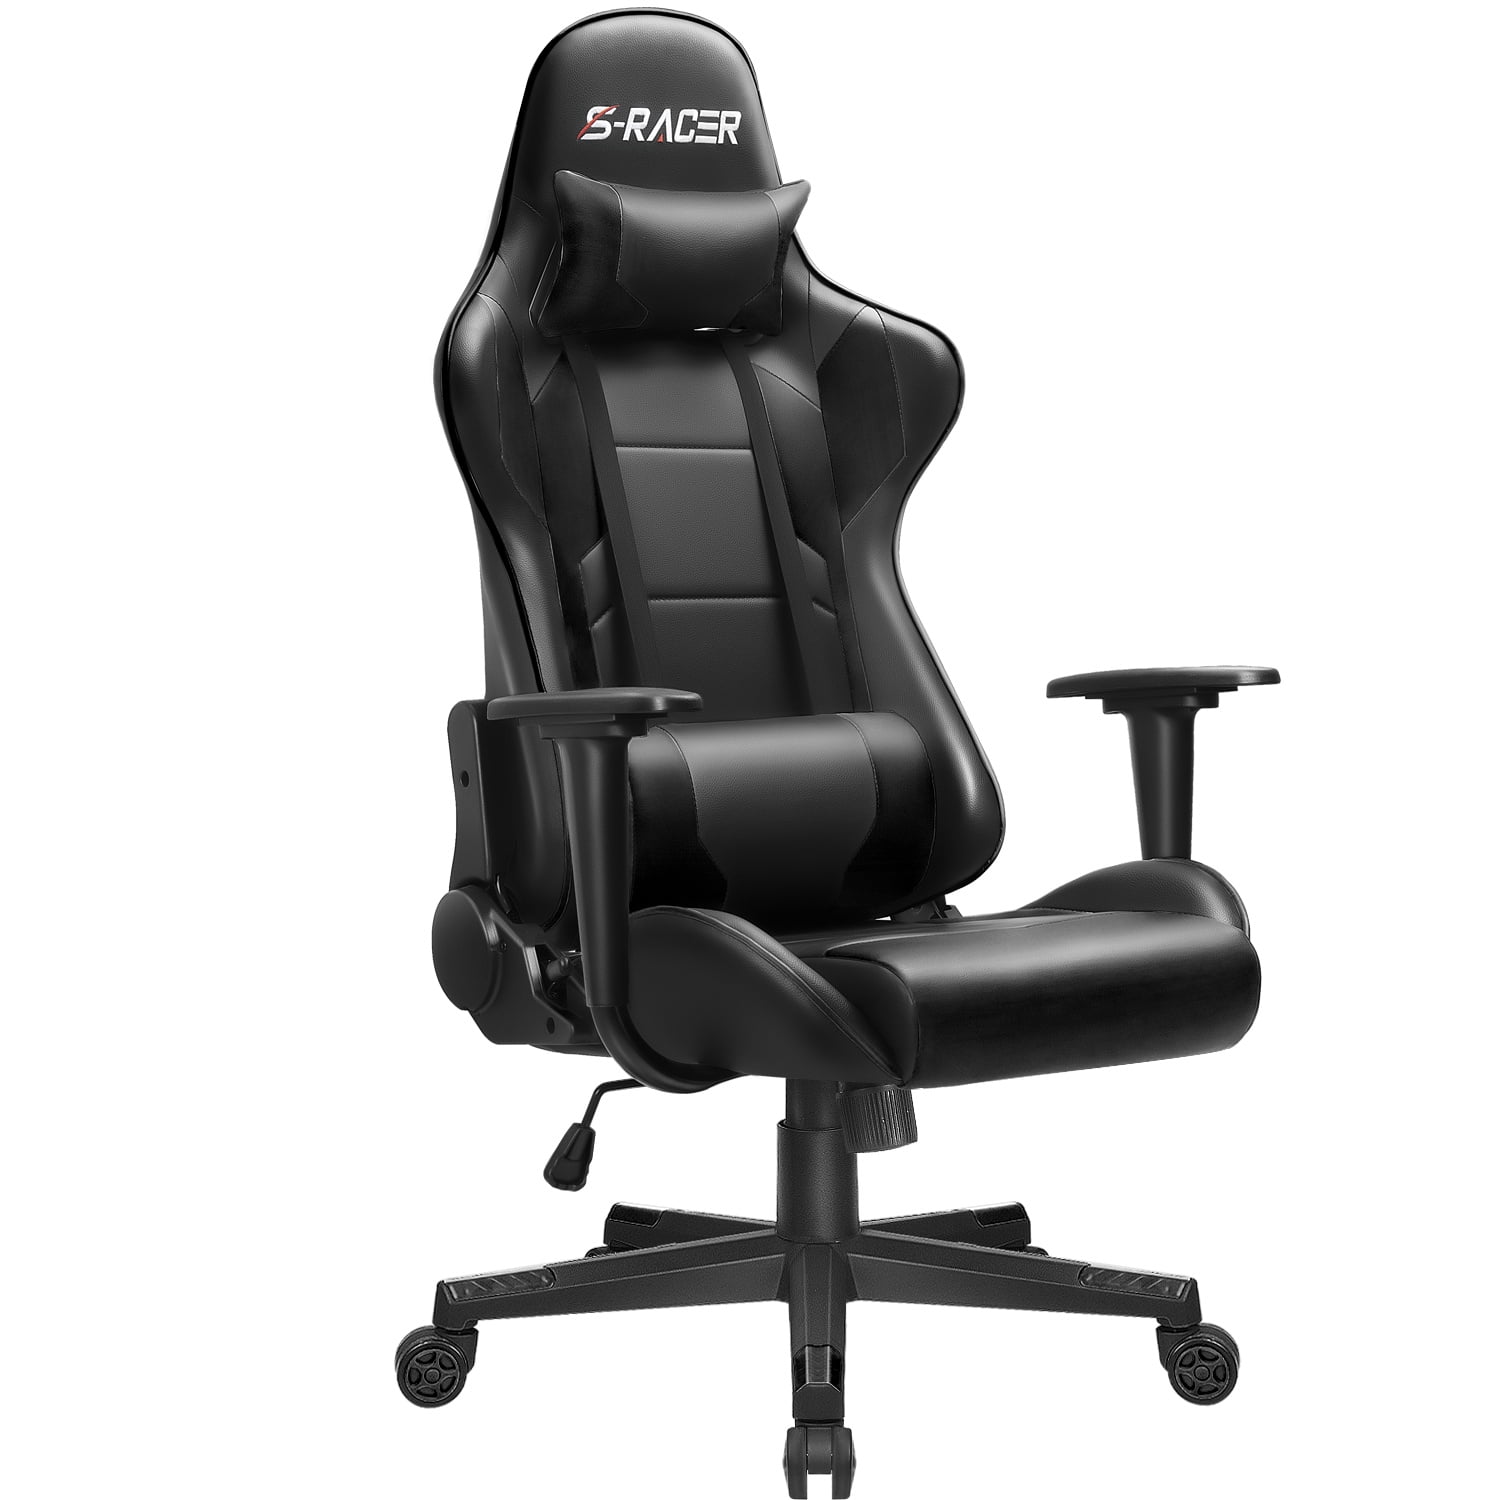 US Ergonomic Racing Home Chair Swivel Office Computer Desk Seat Leather Recliner 